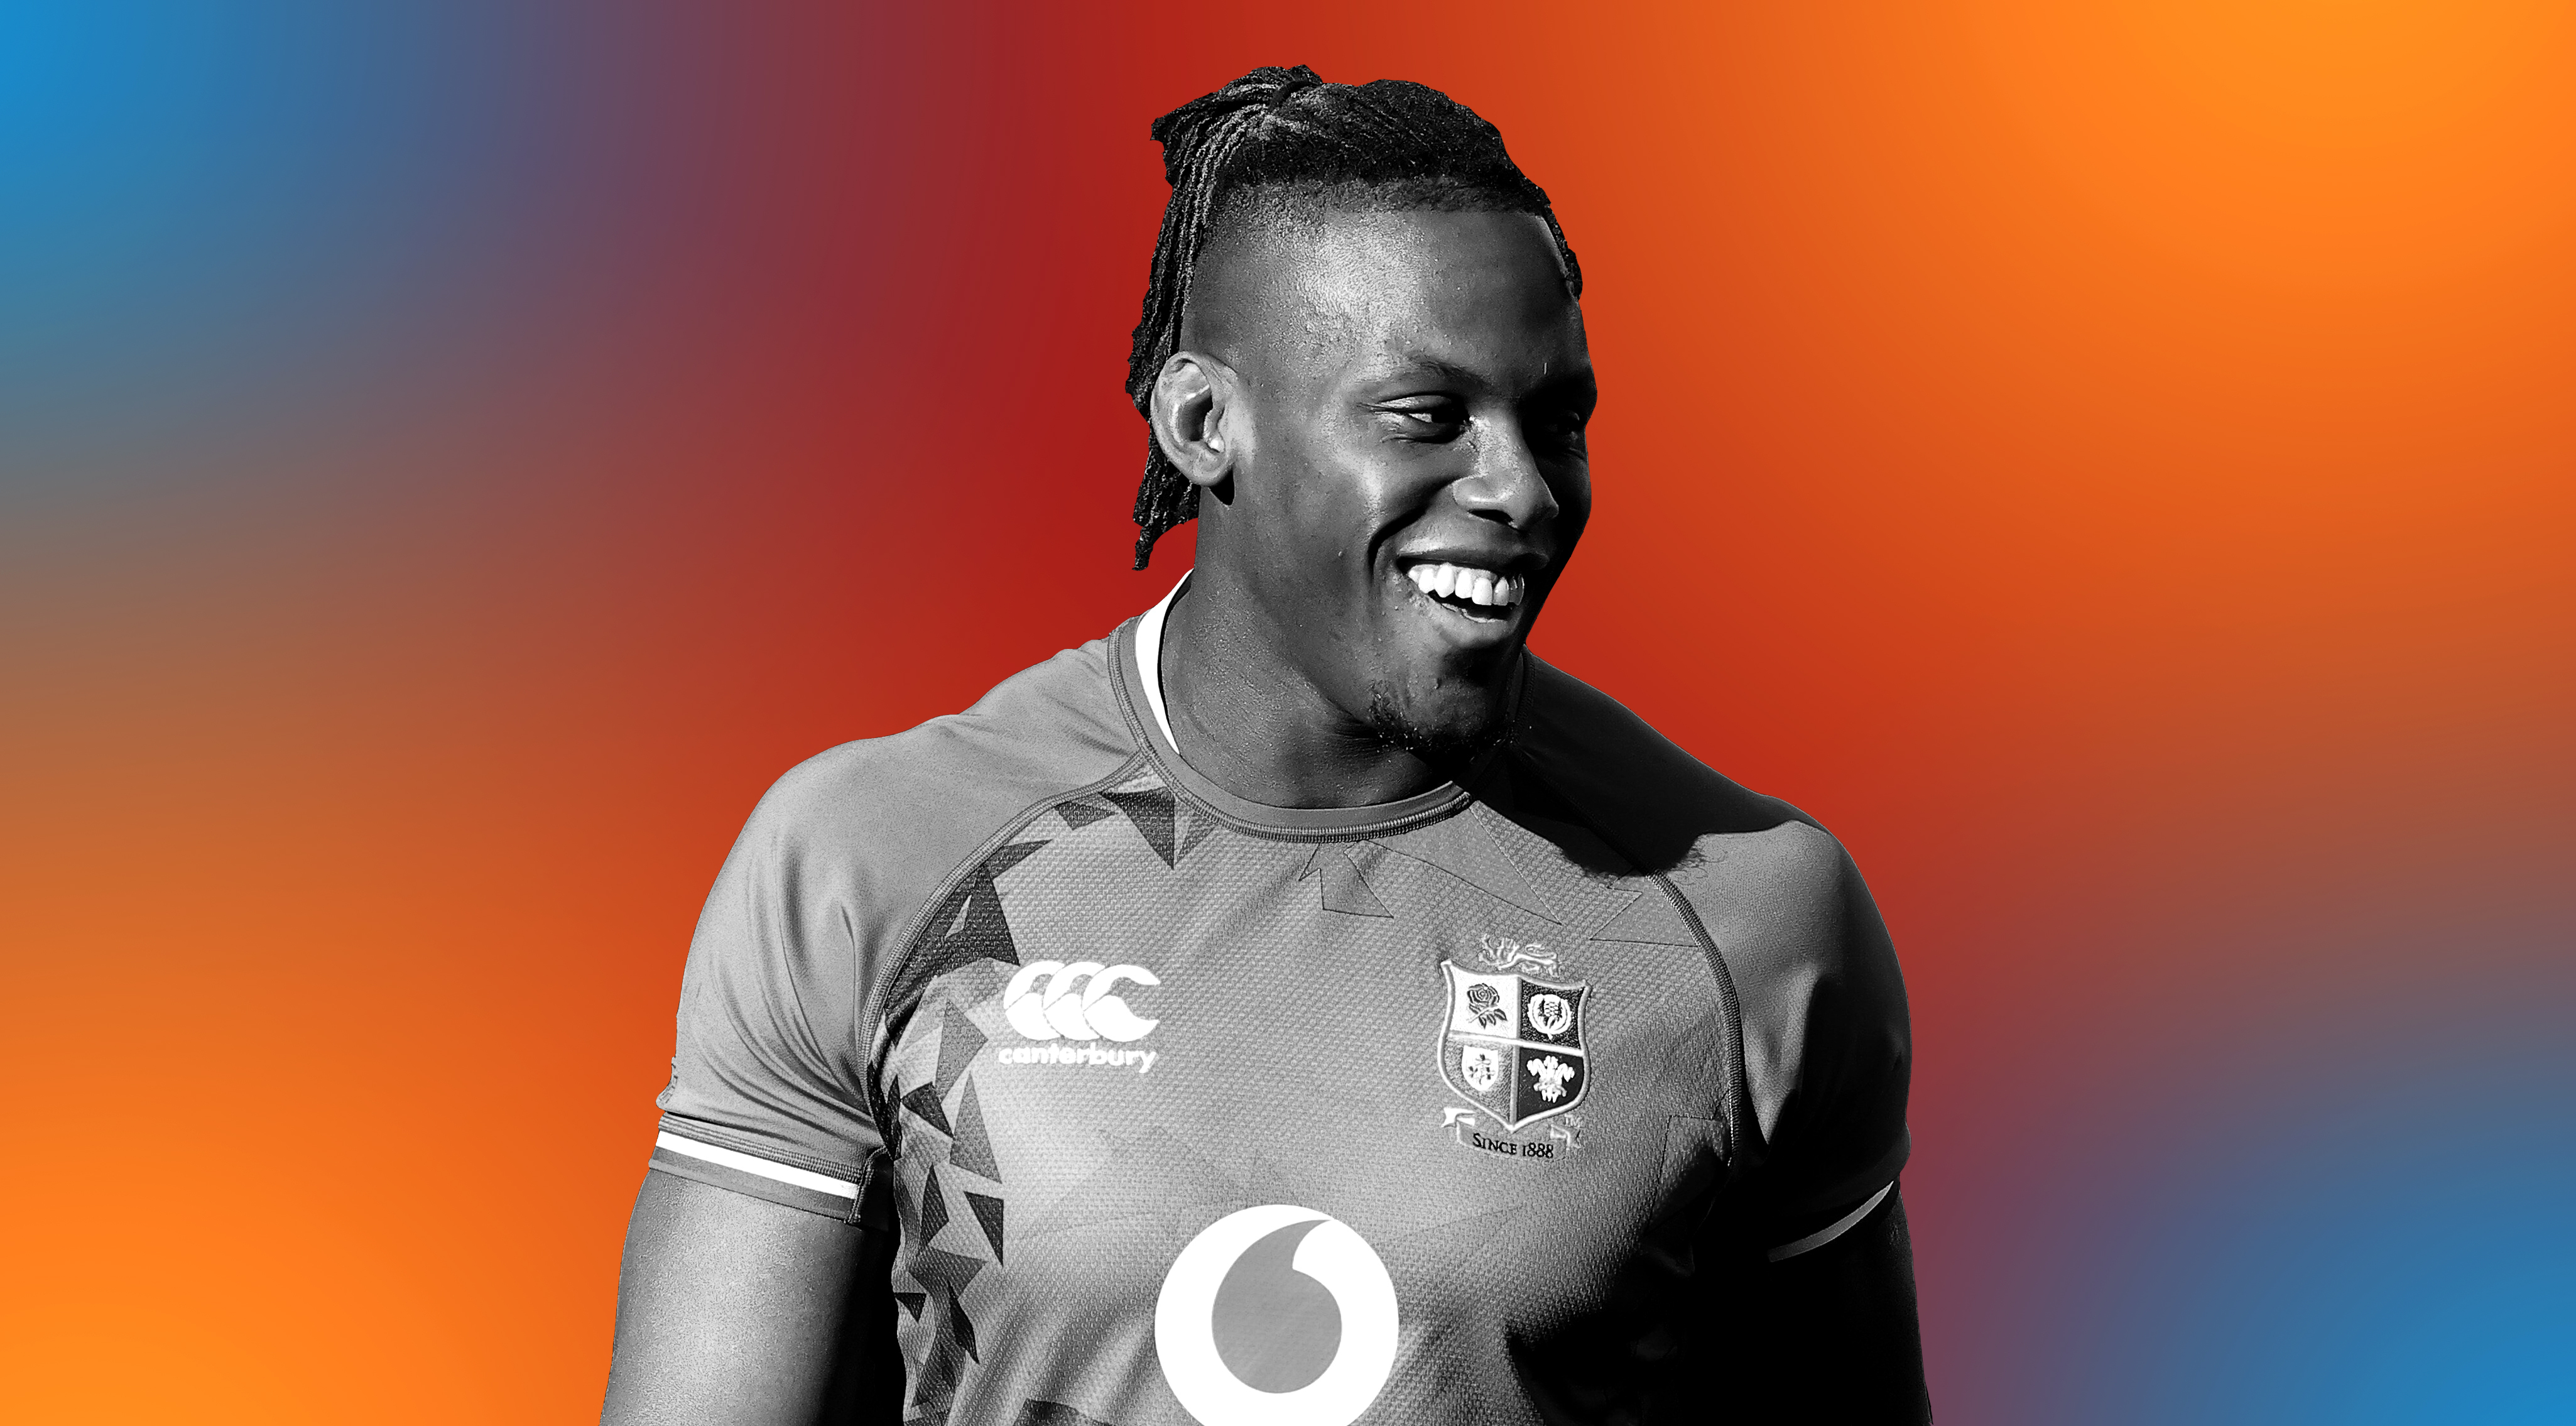 This Is What Black Joy Means To Rugby Star Maro Itoje